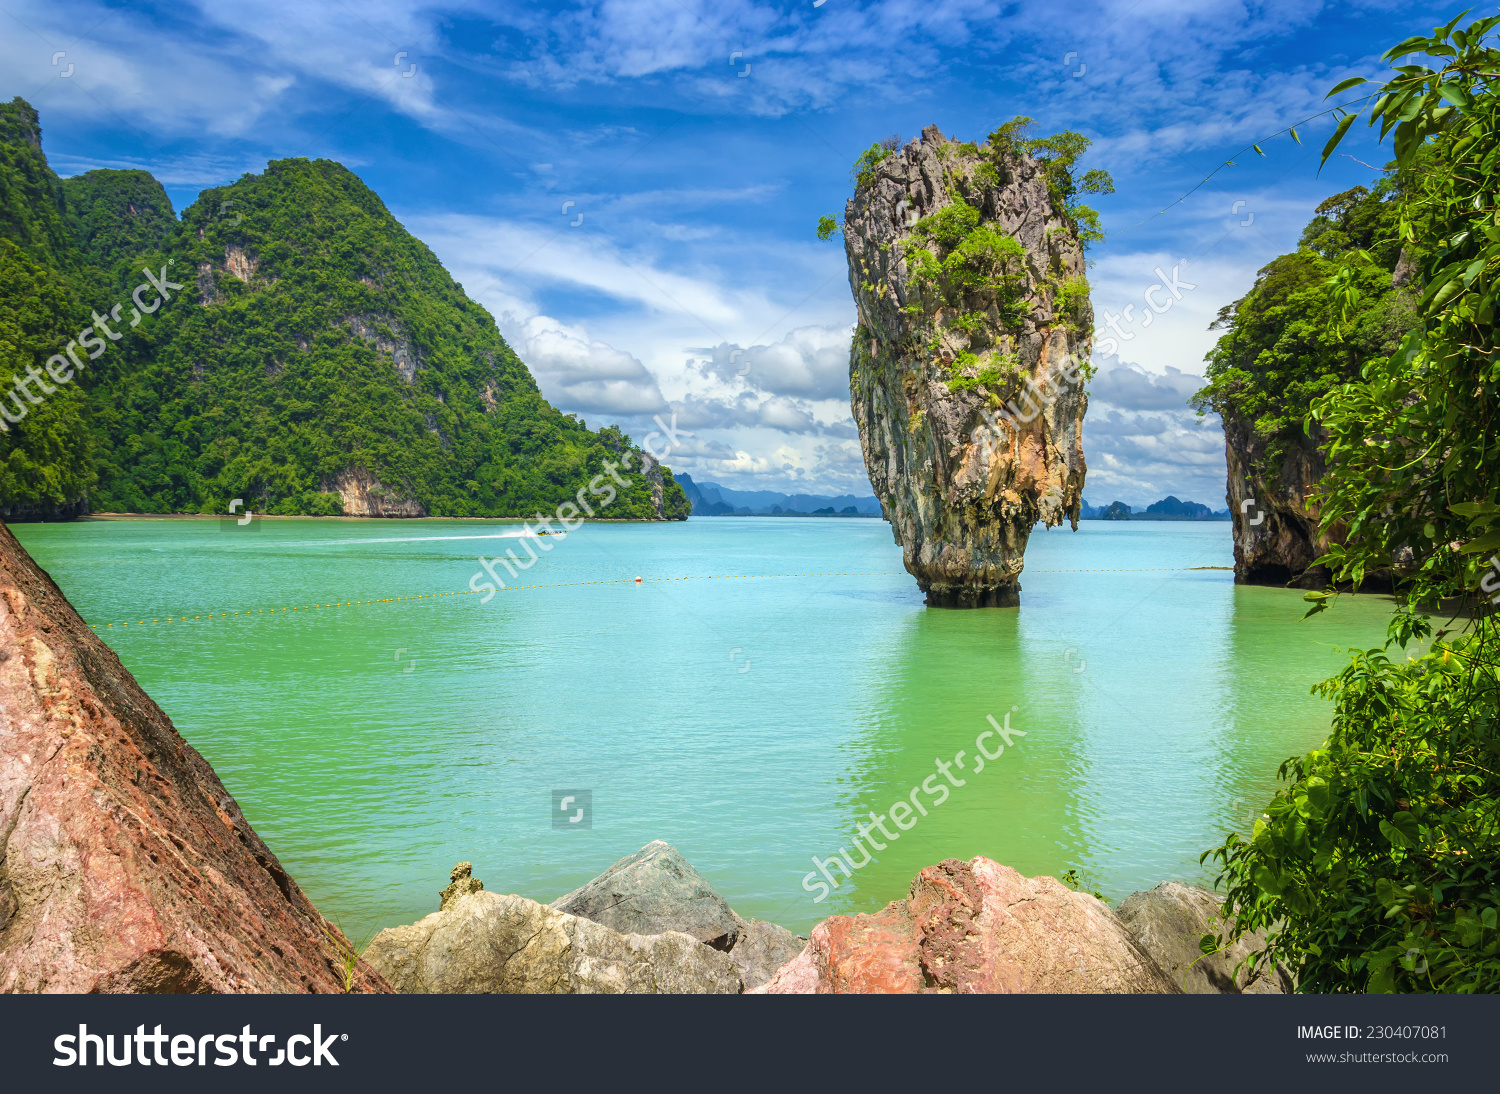 Khao Phing Kan clipart #19, Download drawings